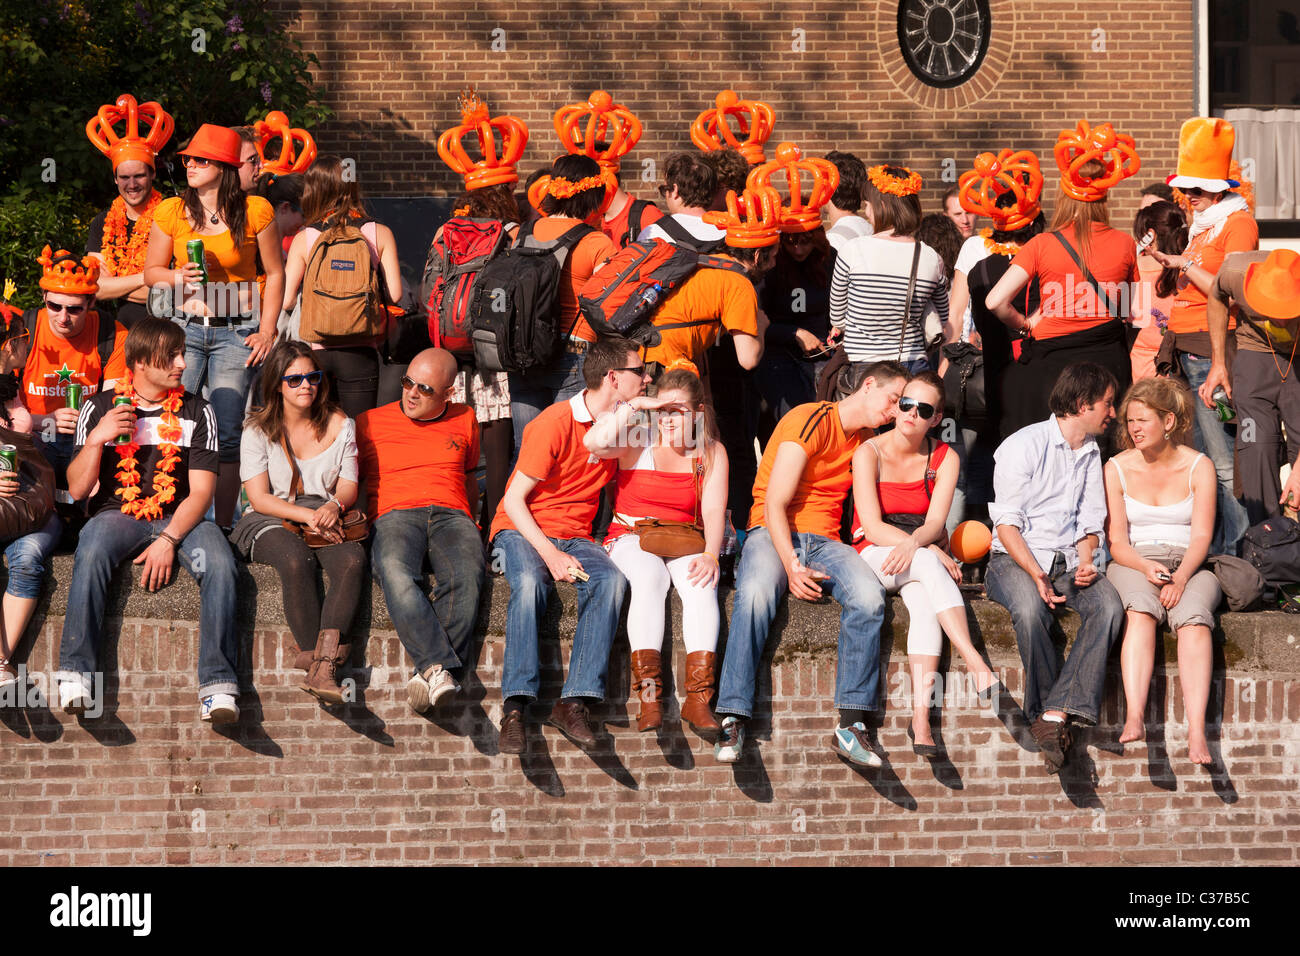 Queensday, the Queen's birthday in Amsterdam. Visitors, dressed up in orange, watching the Canal Parade in the Prinsengracht. Stock Photo